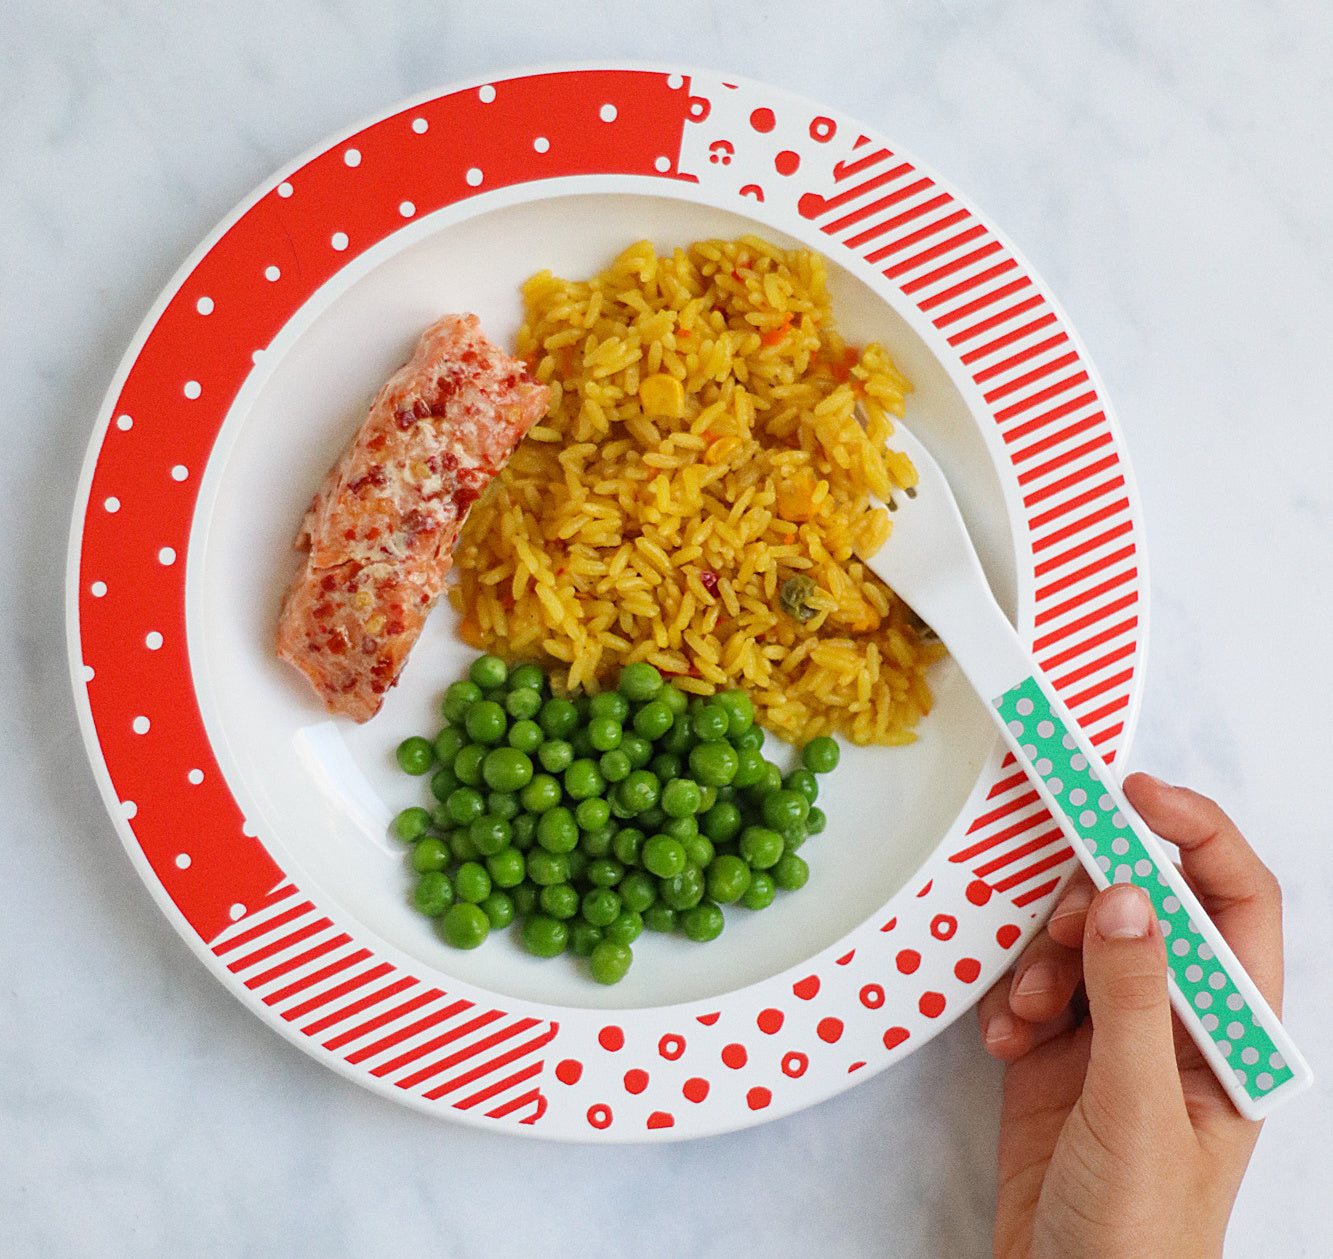 Kids classic plate with a poertion of vegetable rice, fish and peas.